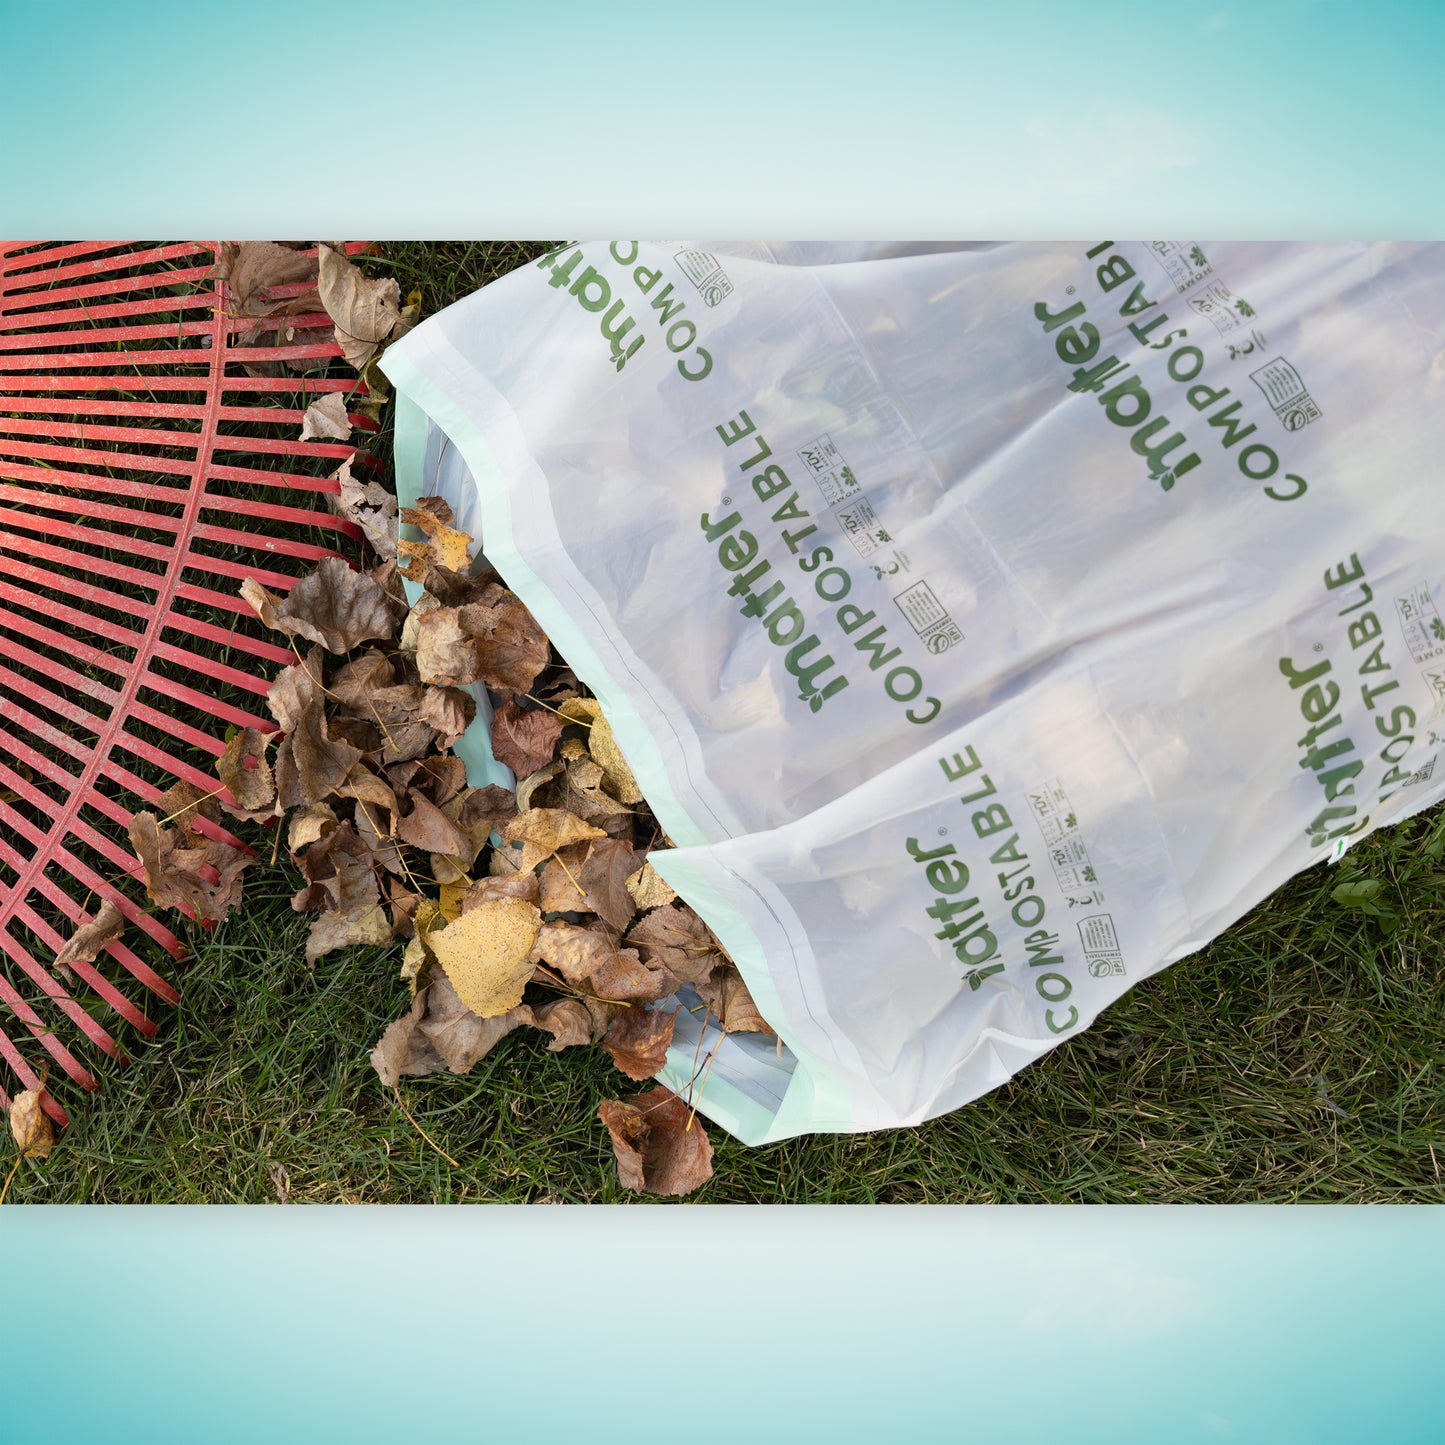 Matter Compostable Lawn & Leaf 33-Gallon Bags - 10 Count